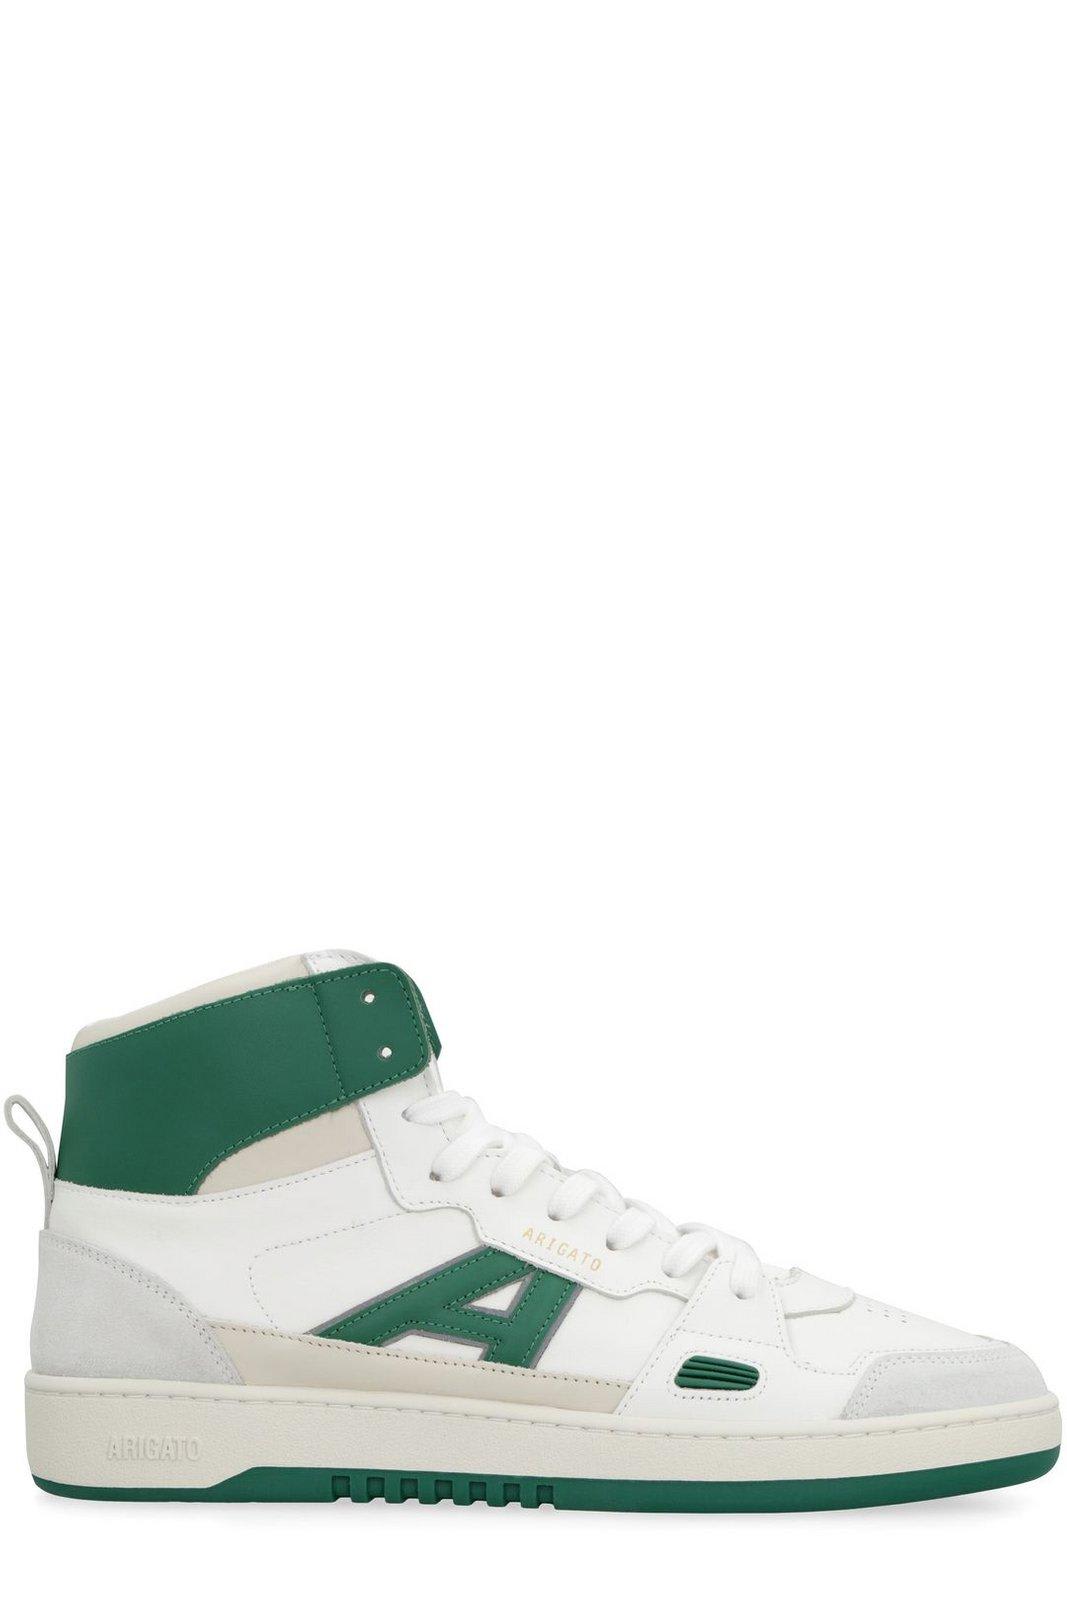 A-dice High-top Sneakers